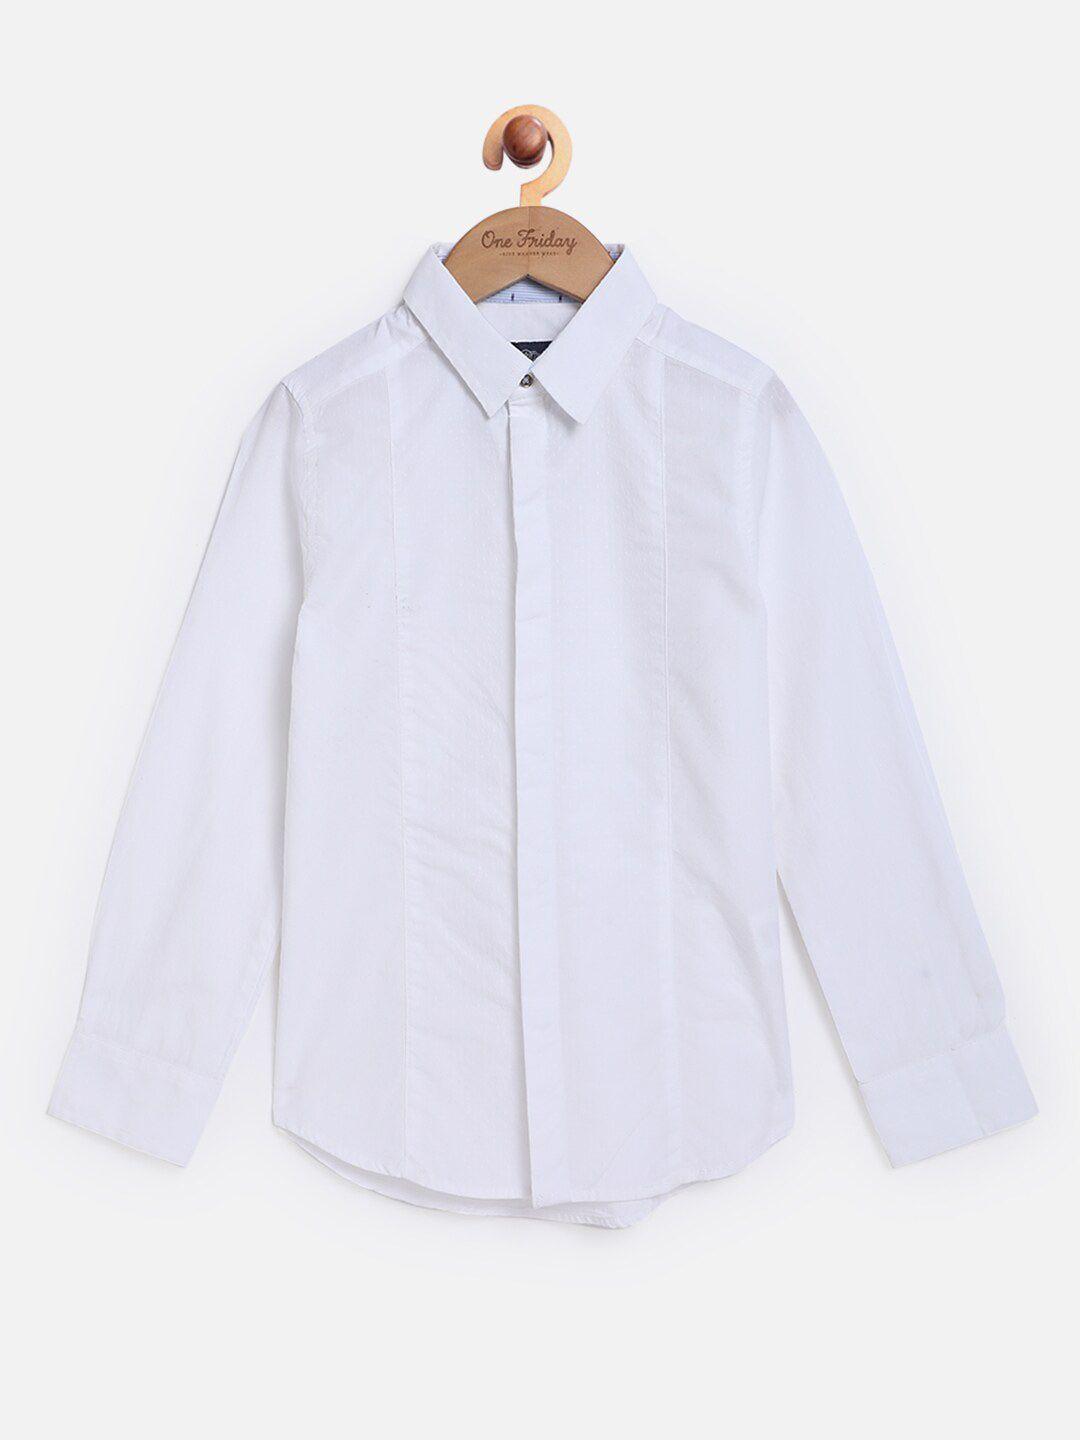 one friday boys casual pure cotton shirt